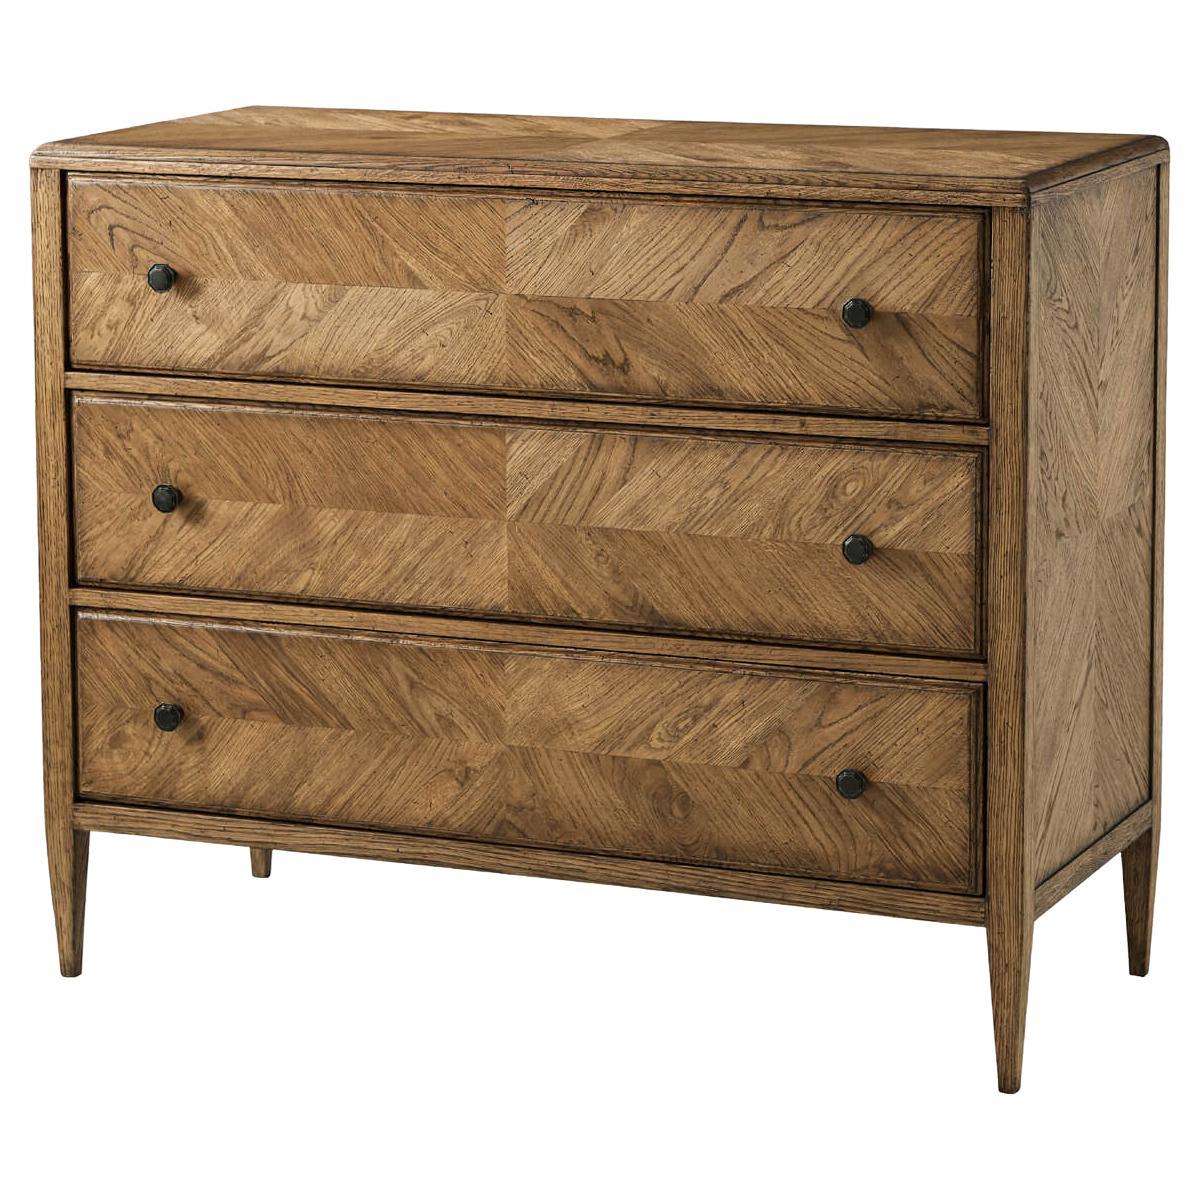 Rustic Oak Chest of Drawers, Light